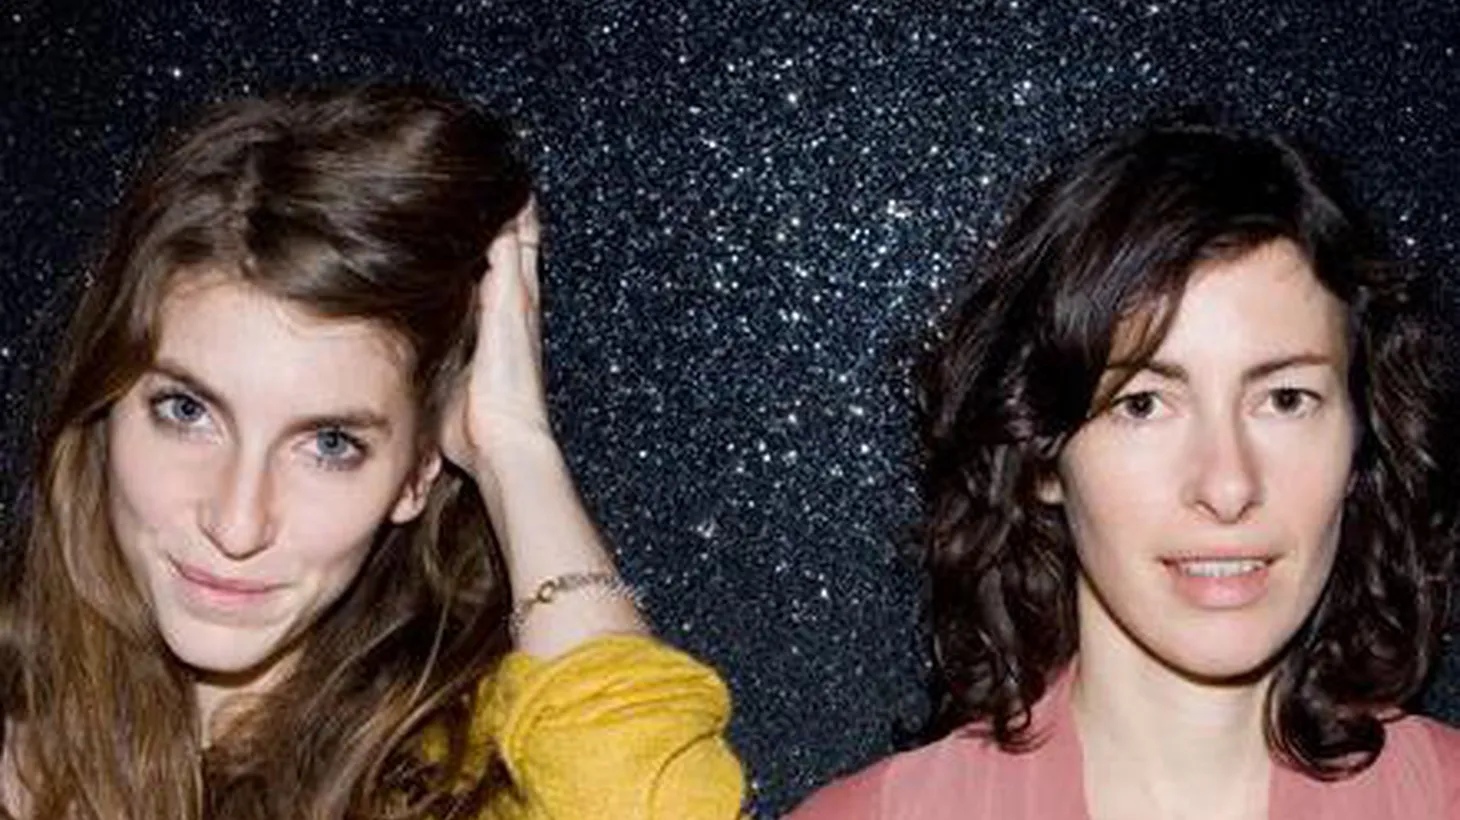 Boy is actually a band of two young women from Germany. Their debut full-length chronicles their hopes and aspirations in a series of excellent pop songs.